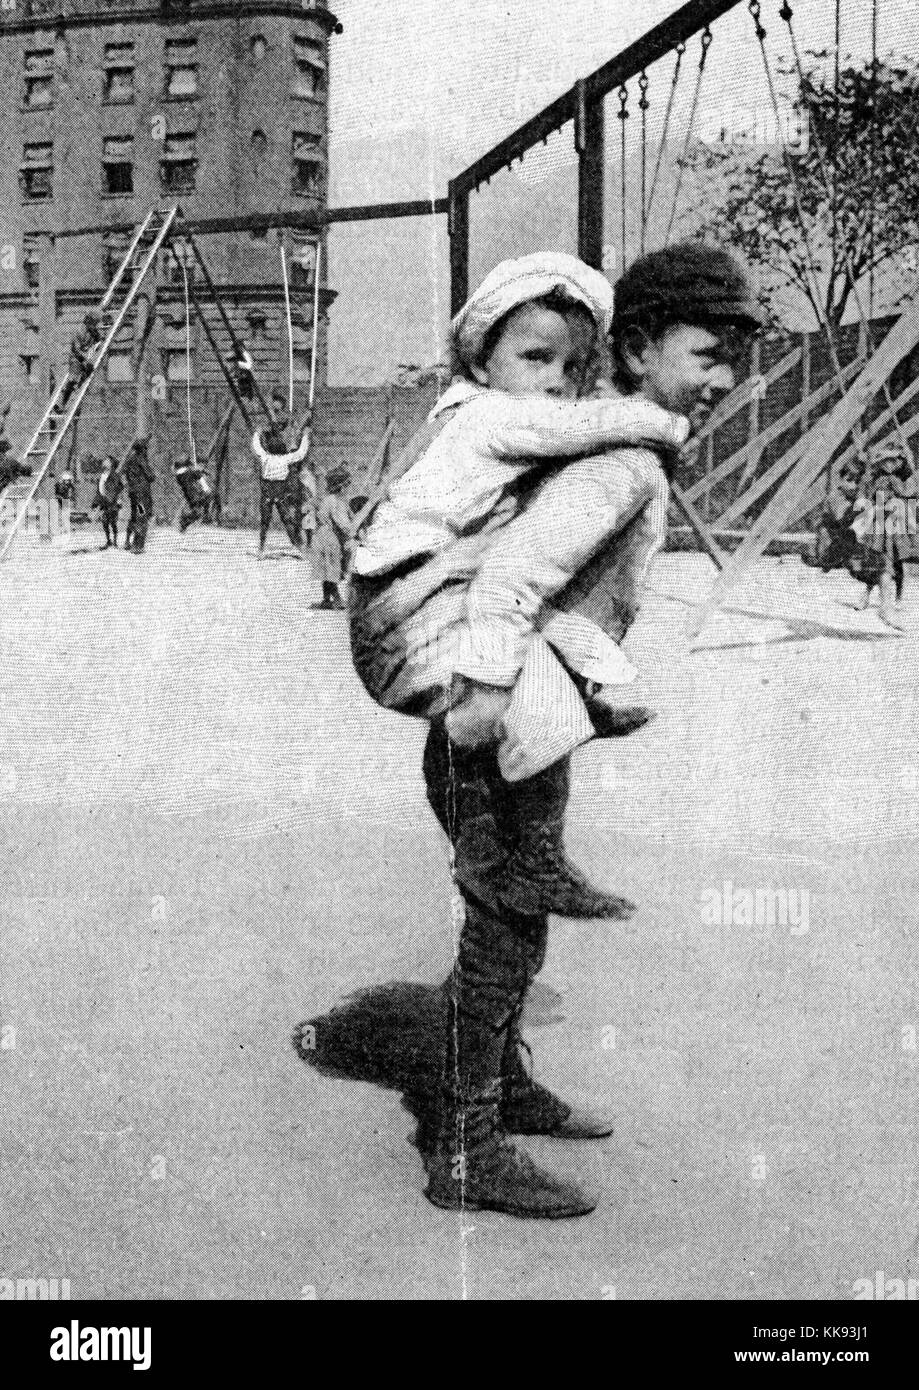 Black and white photograph of a boy carrying his younger brother on his back, at a playground, captioned 'In The New Playground', by Jacob Riis, a Danish-American social reformer and social documentary photographer known for using his photographic and journalistic talents to help the impoverished in New York City, New York City, New York, 1901. From the New York Public Library. Stock Photo